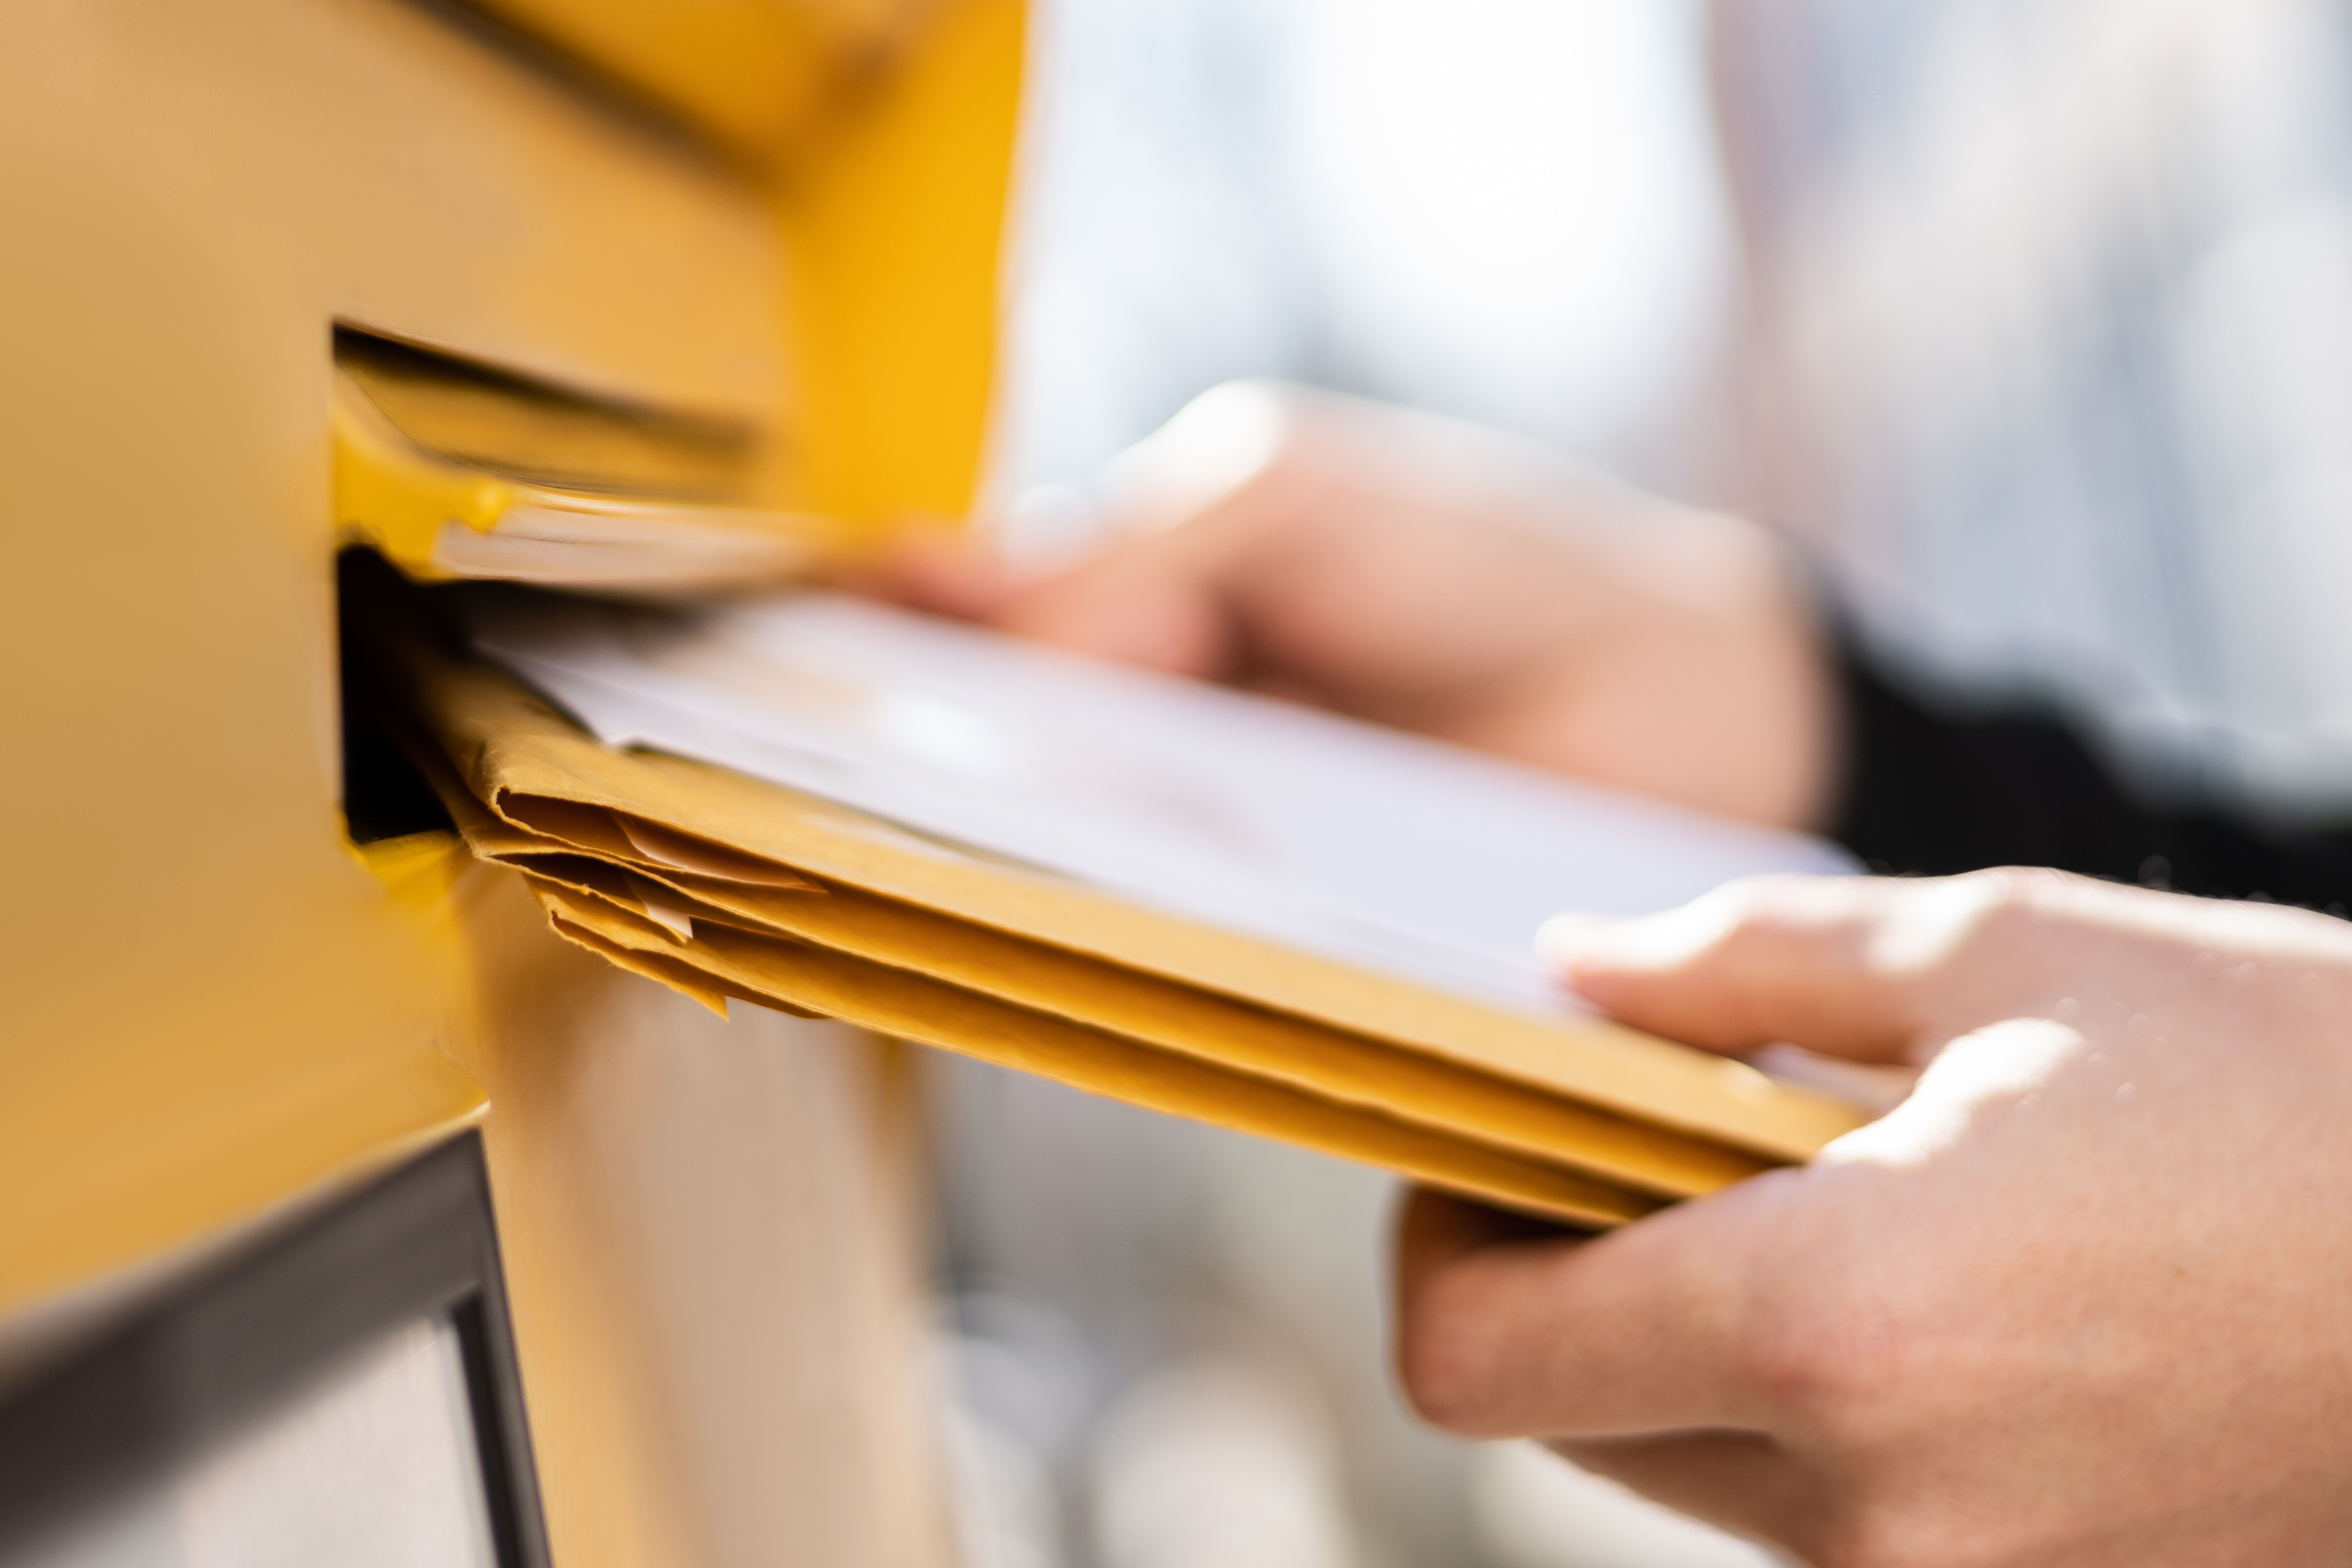 Image shows a person's hands putting yellow envelopes into a mailbox slot.